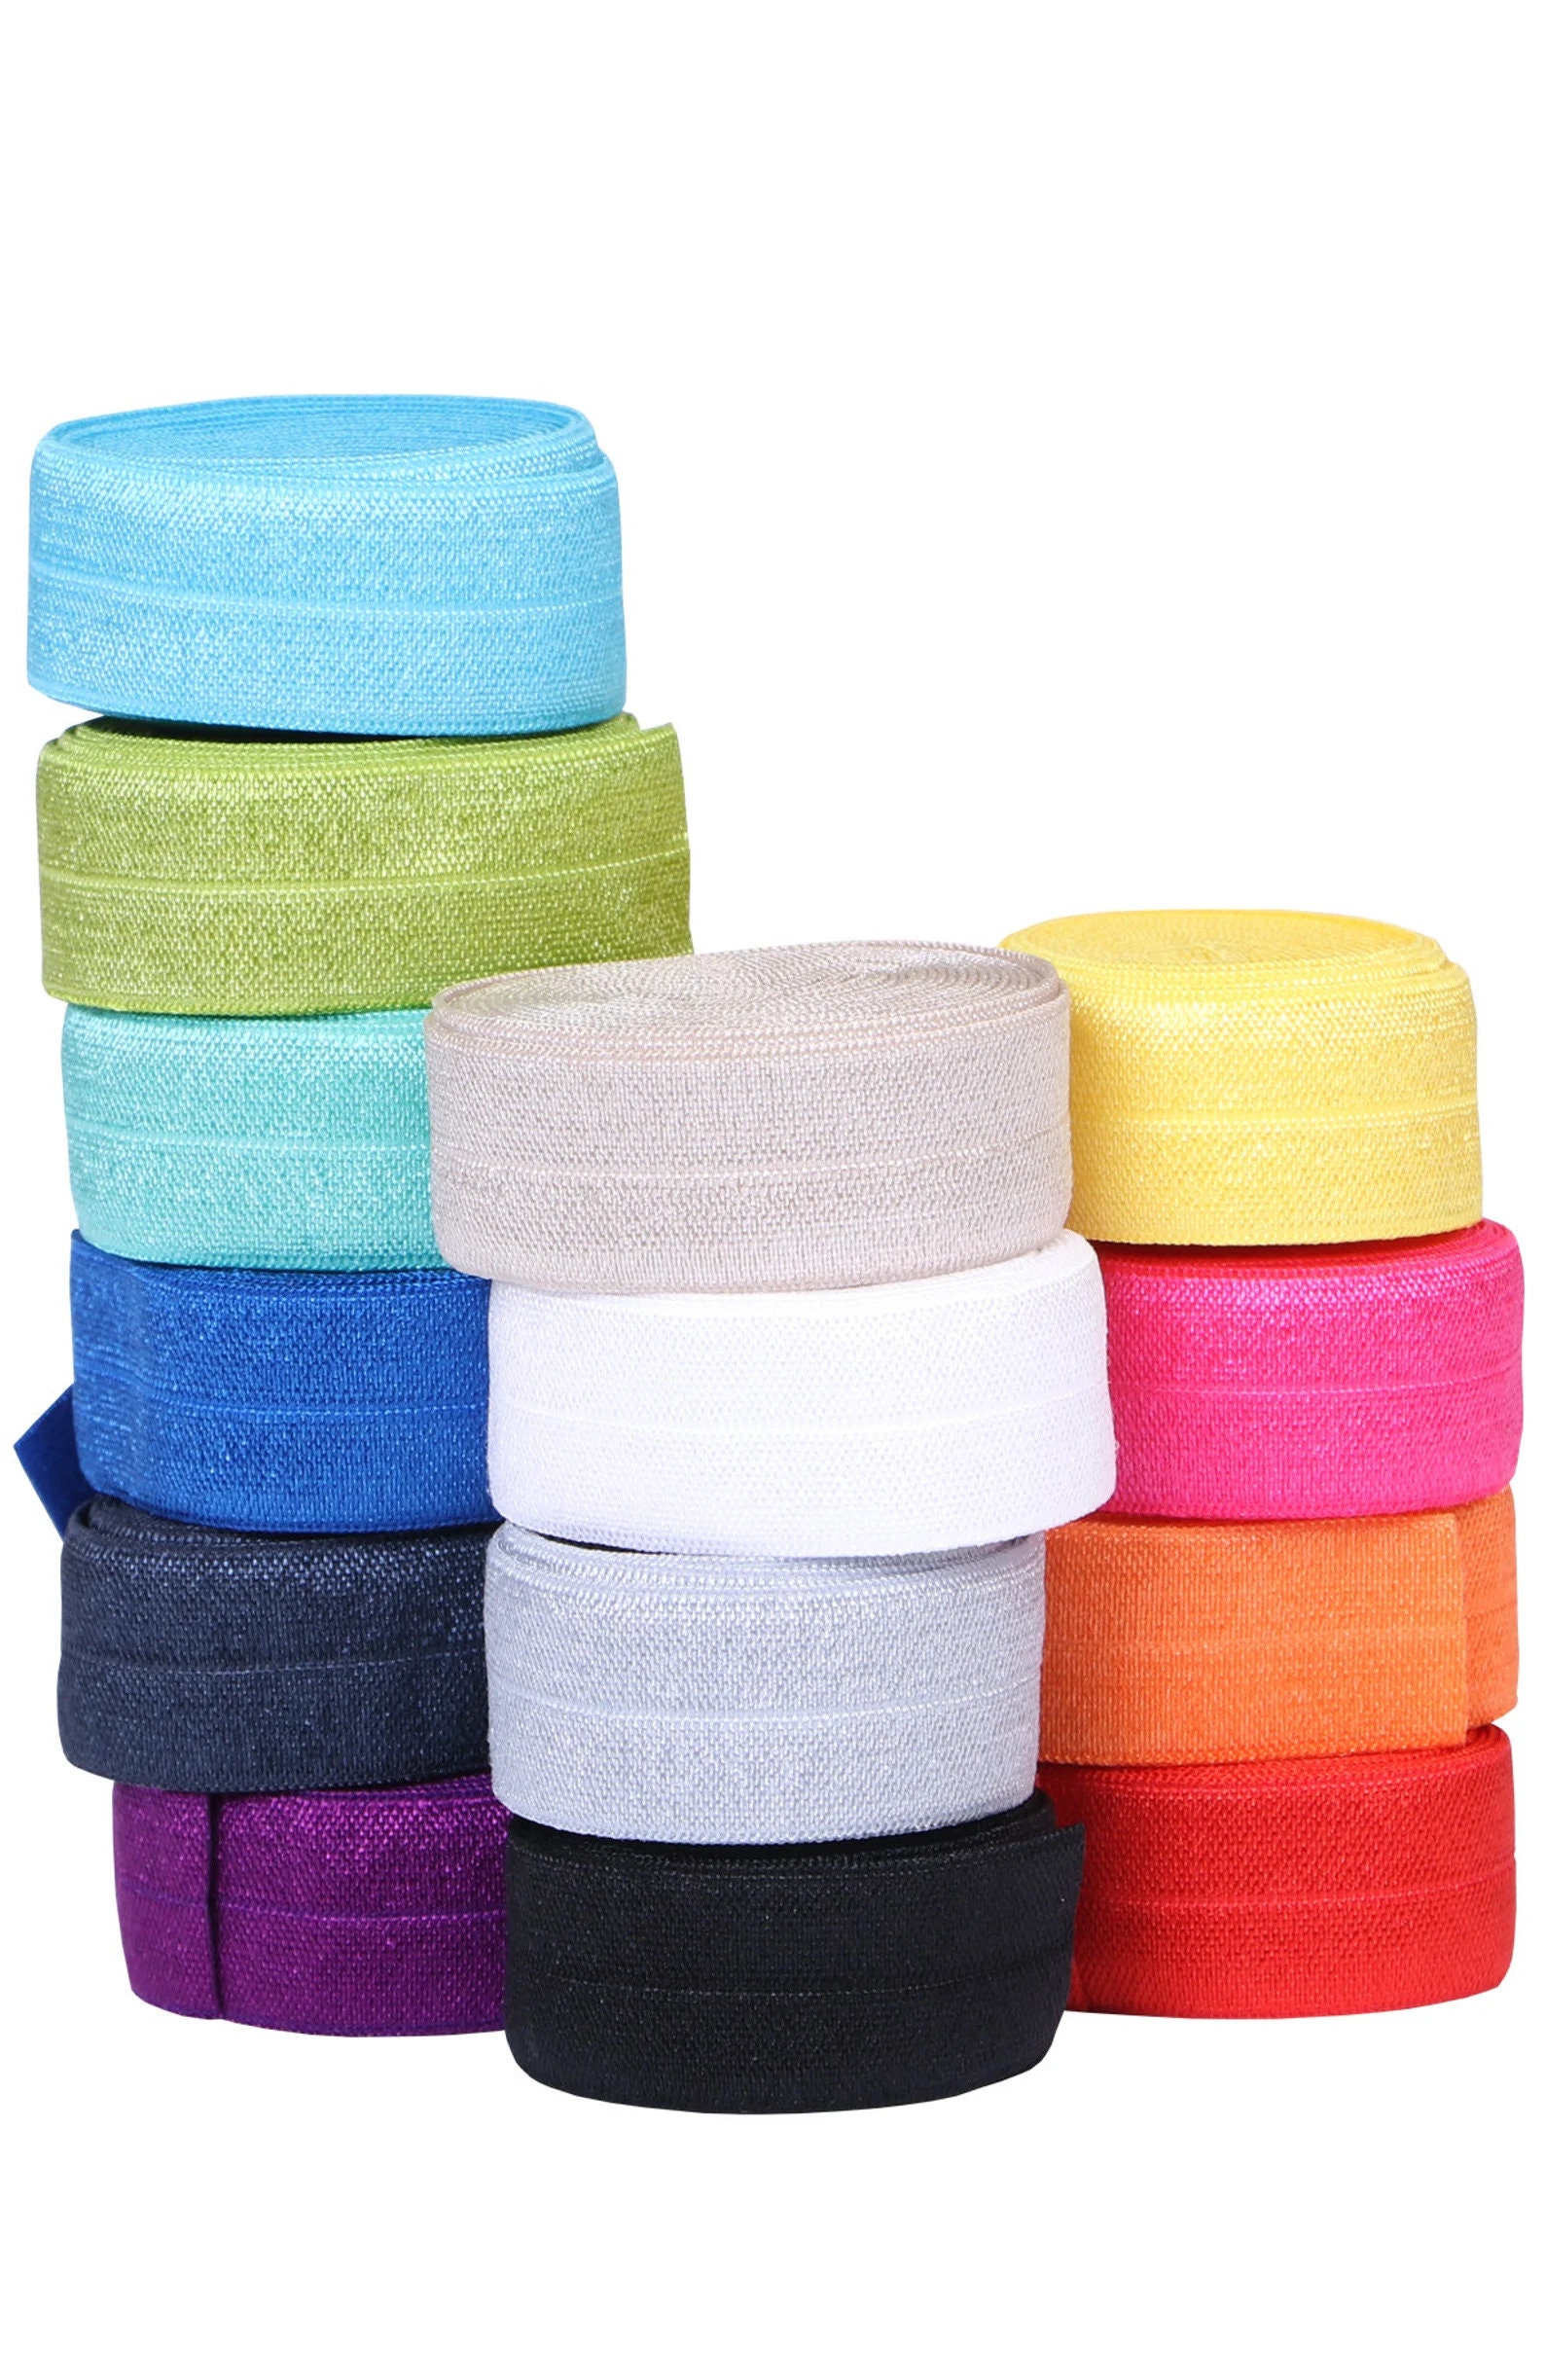 Great Deals On Flexible And Durable Wholesale 3 inch wide elastic